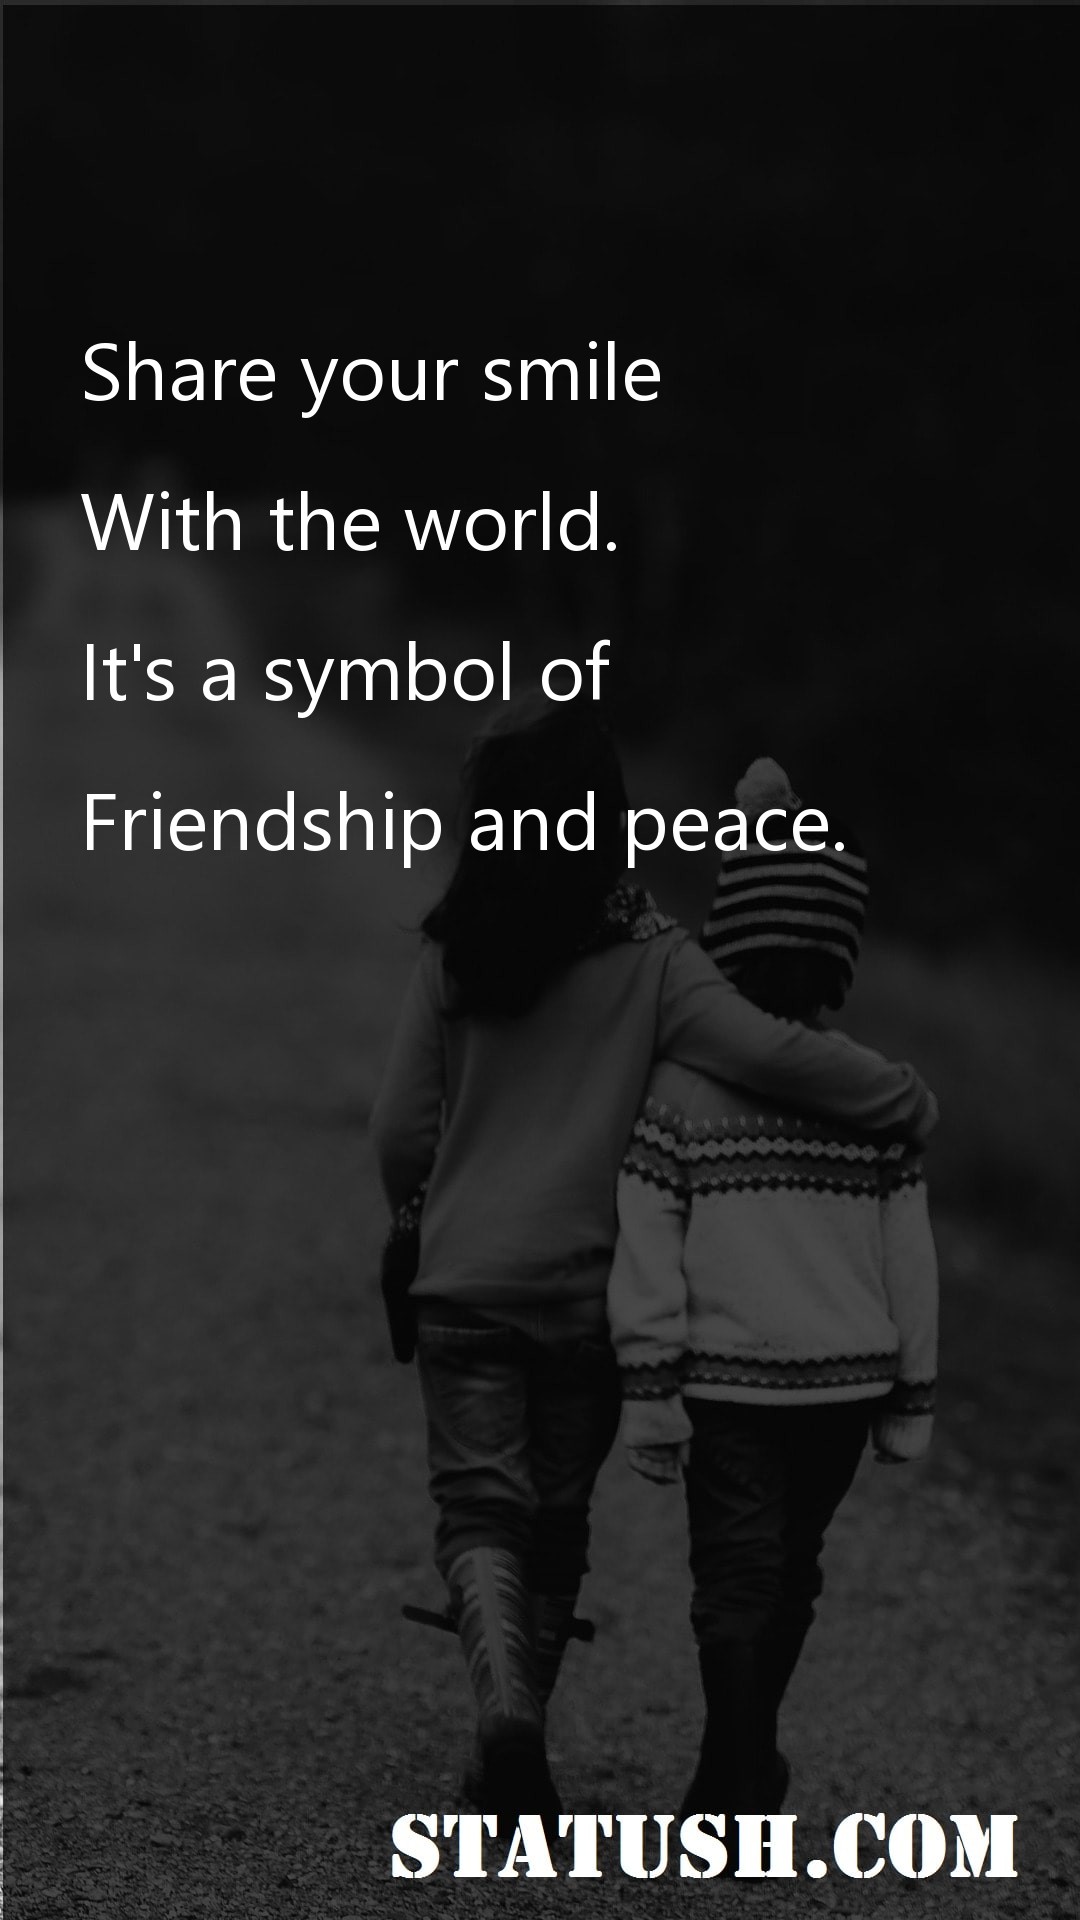 Share your smile with the world - Friendship Quotes at statush.com